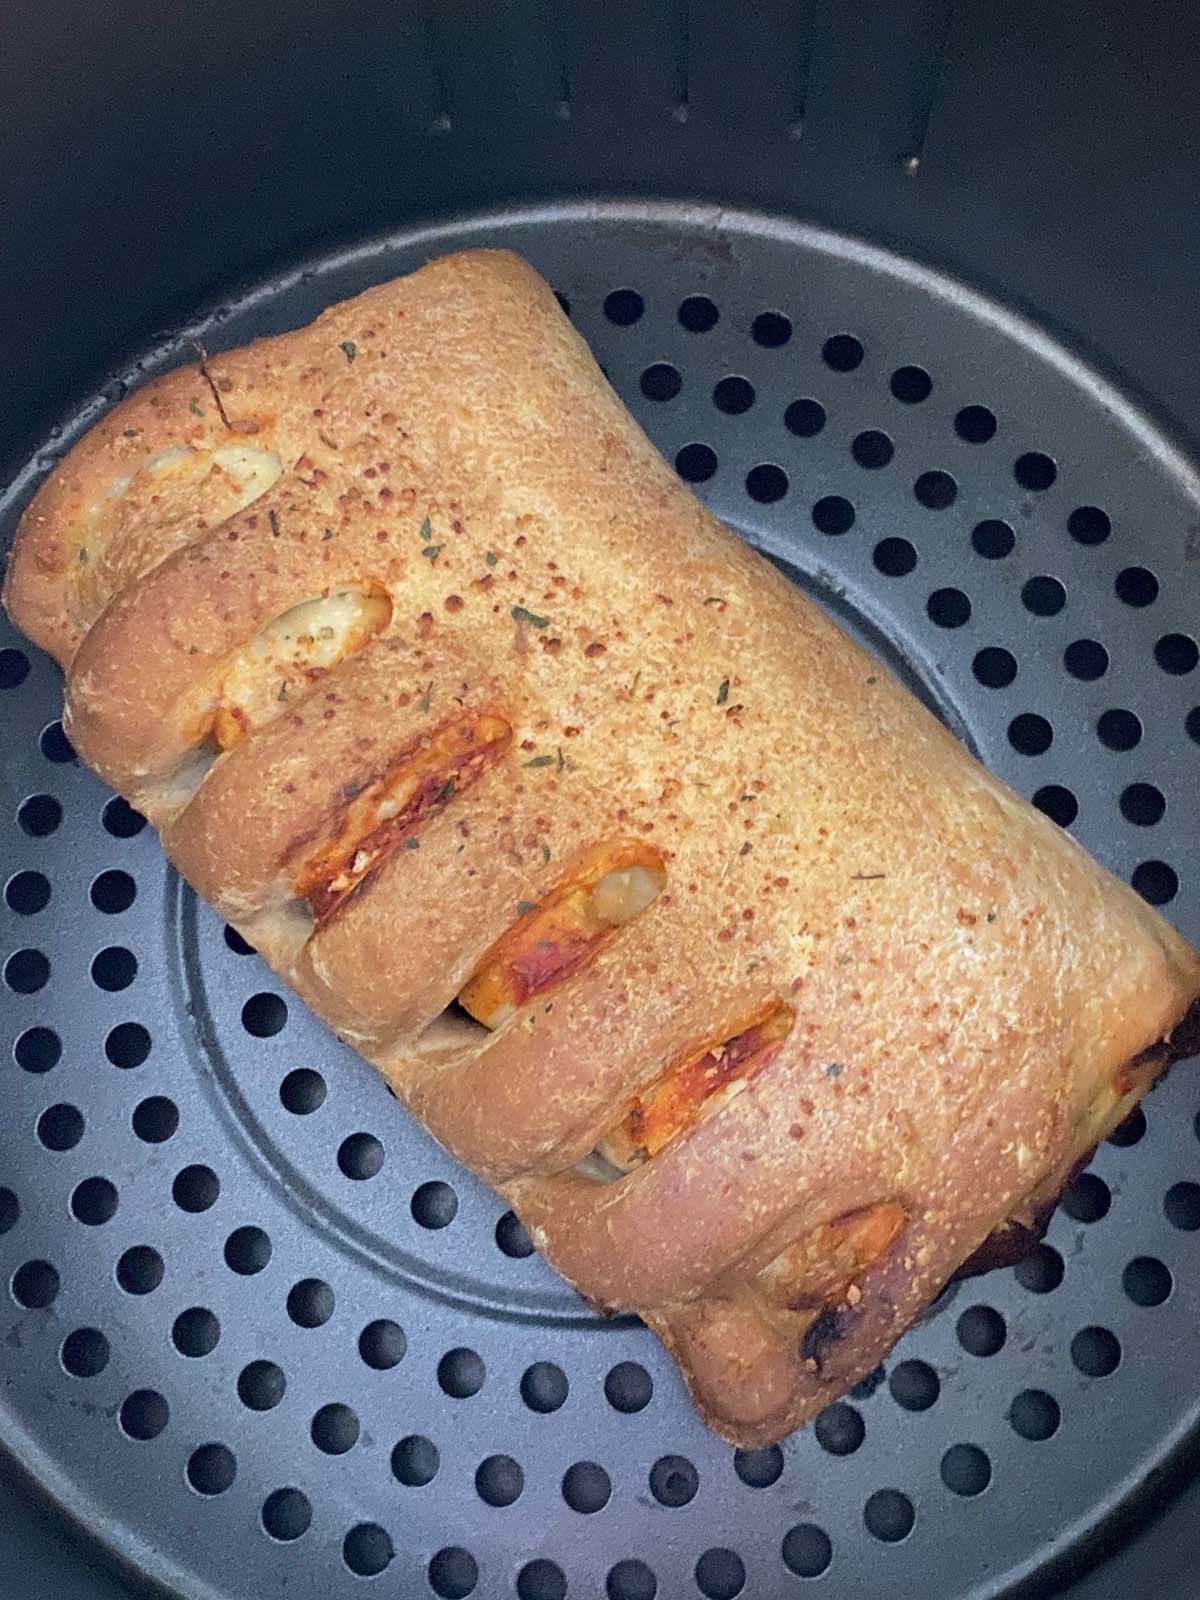 Cooked stromboli in an air fryer.